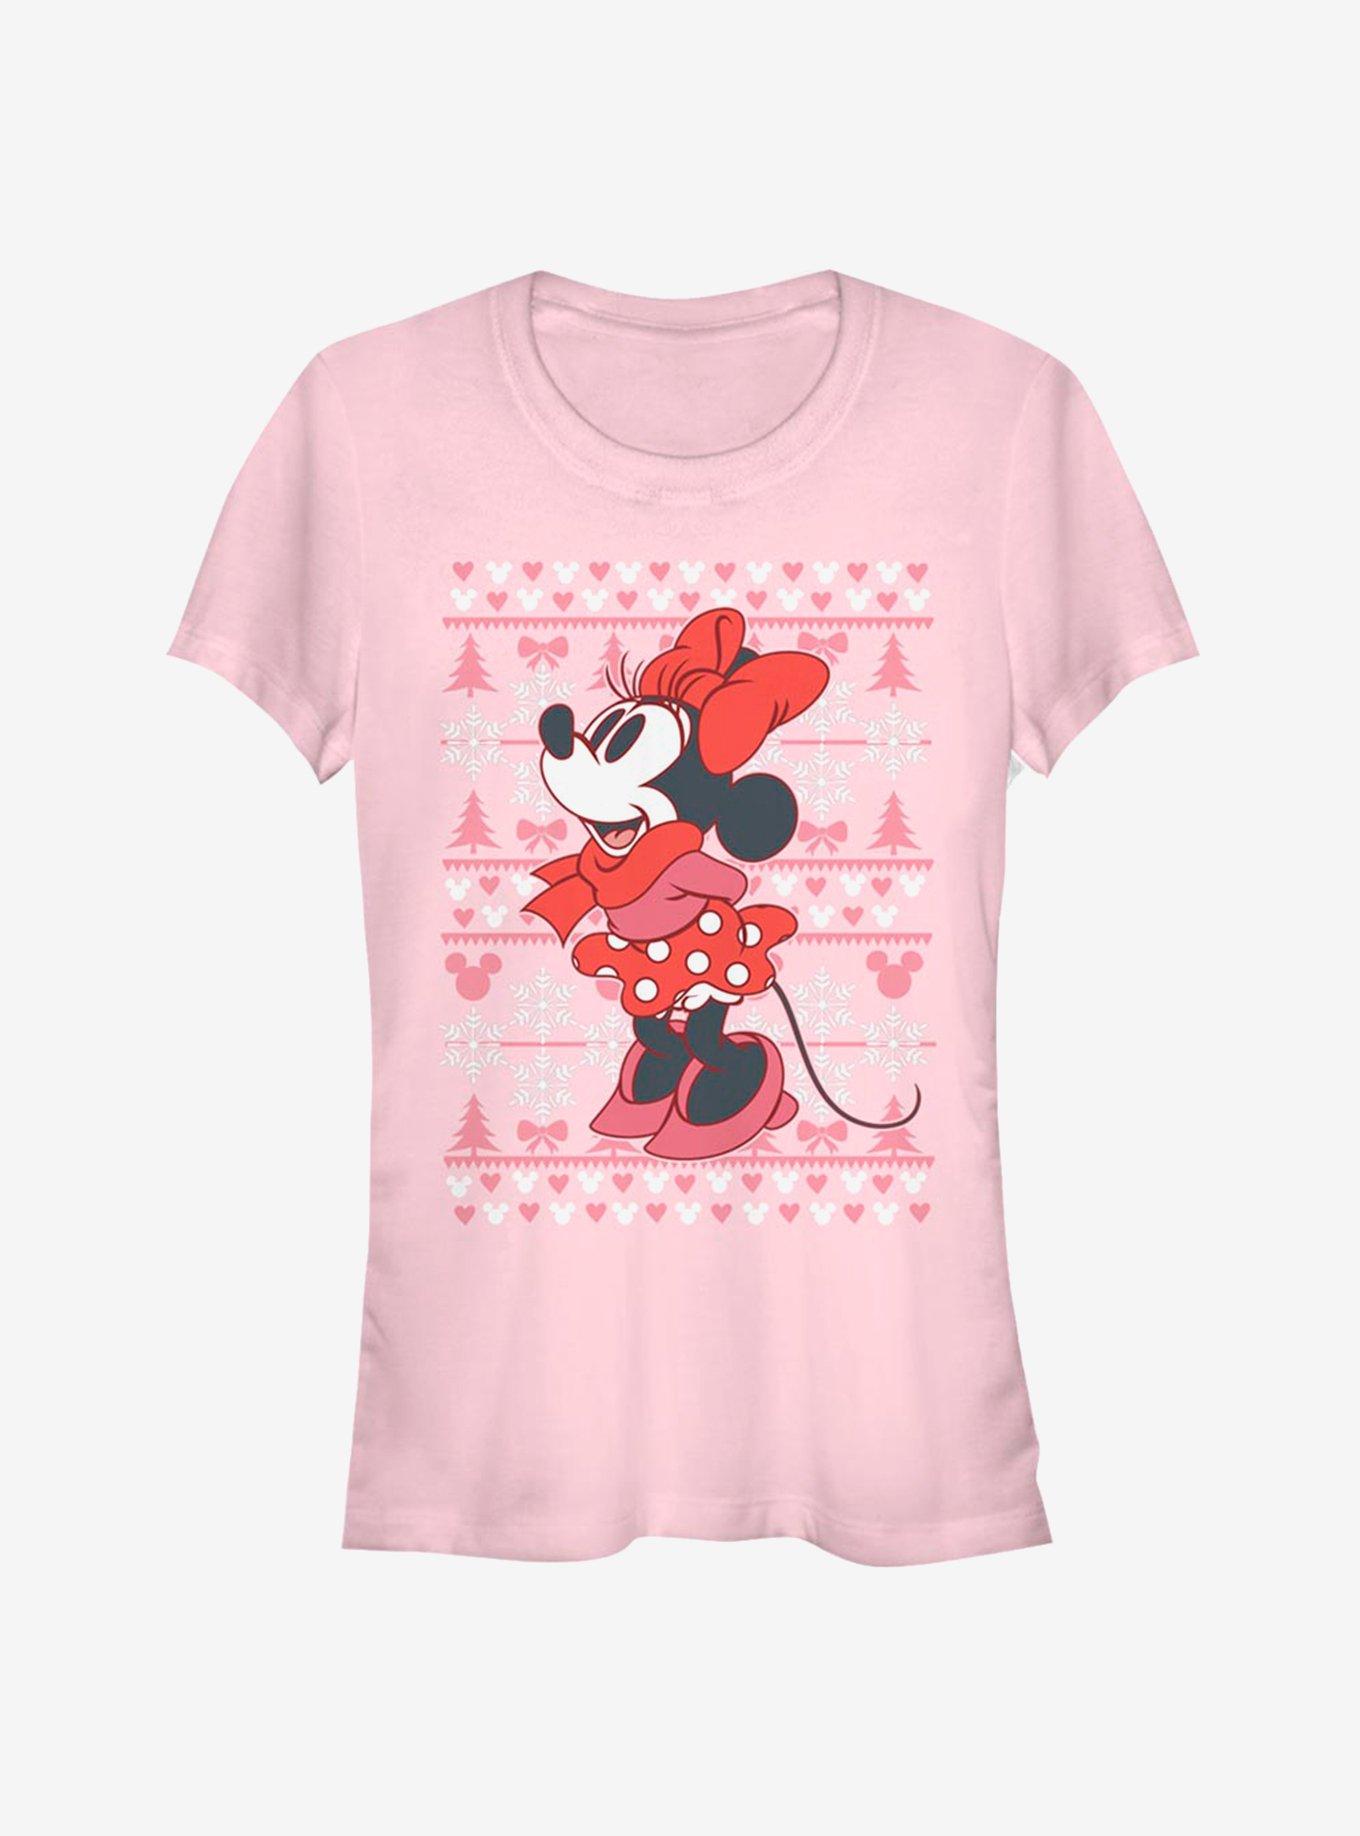 Disney Minnie Mouse Vintage Holiday Sweater Classic Girls T-Shirt, LIGHT PINK, hi-res